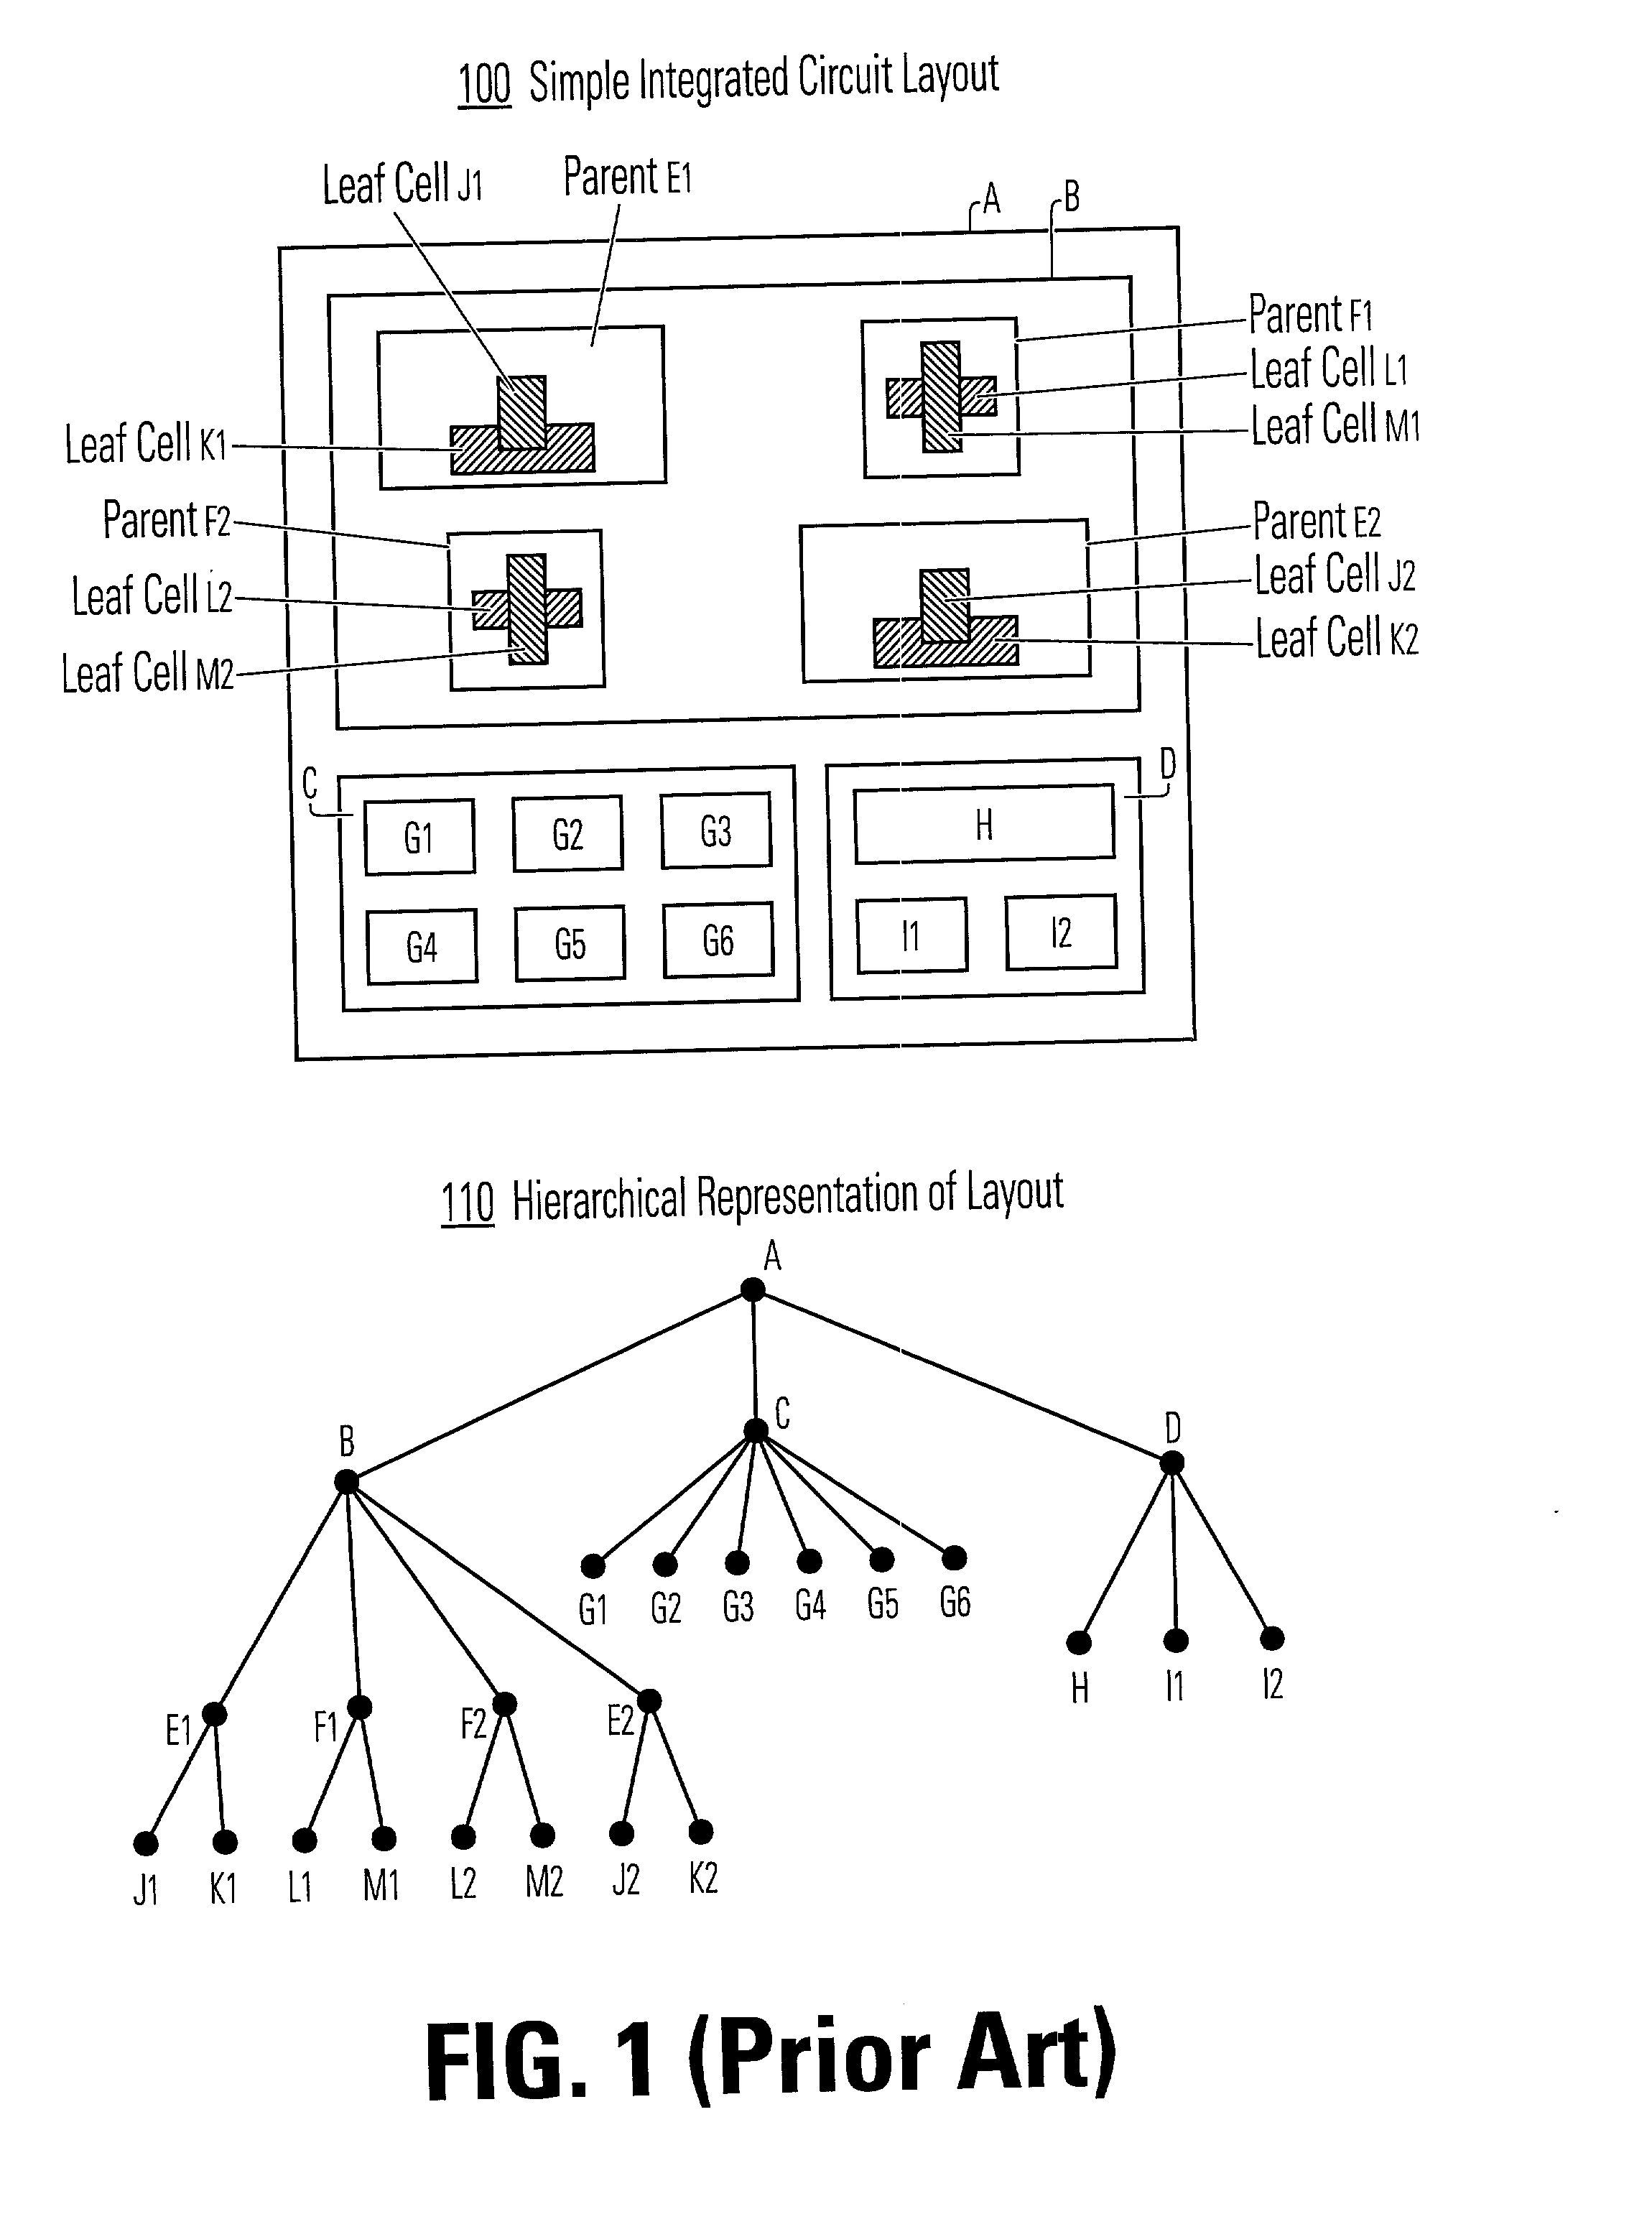 Method and apparatus for data hierarchy maintenance in a system for mask description